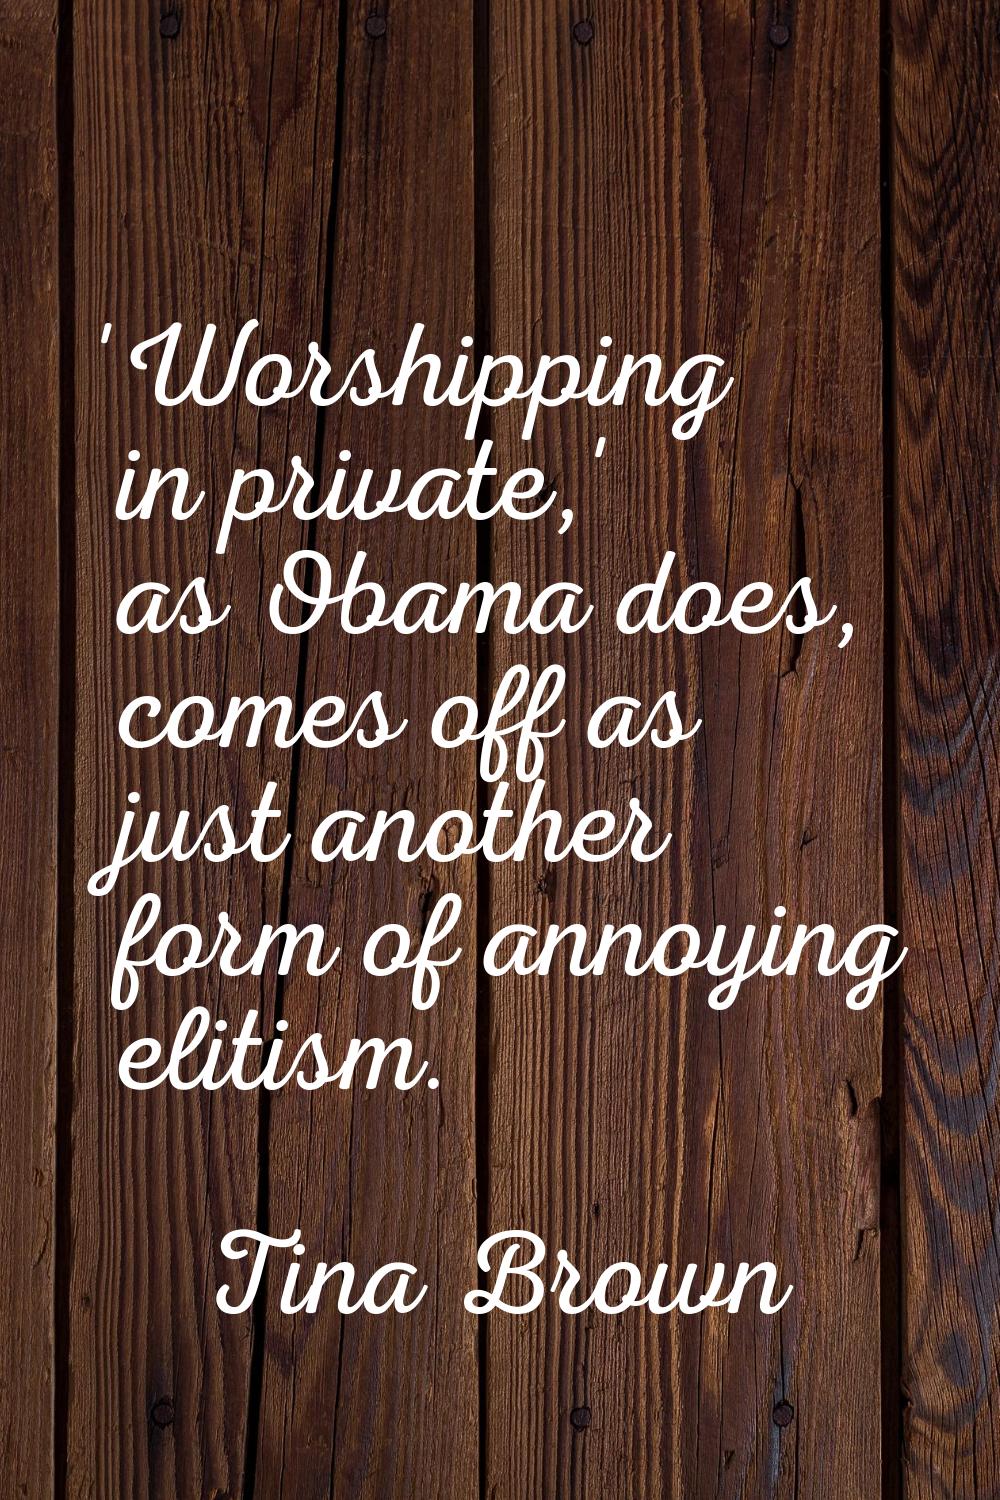 'Worshipping in private,' as Obama does, comes off as just another form of annoying elitism.